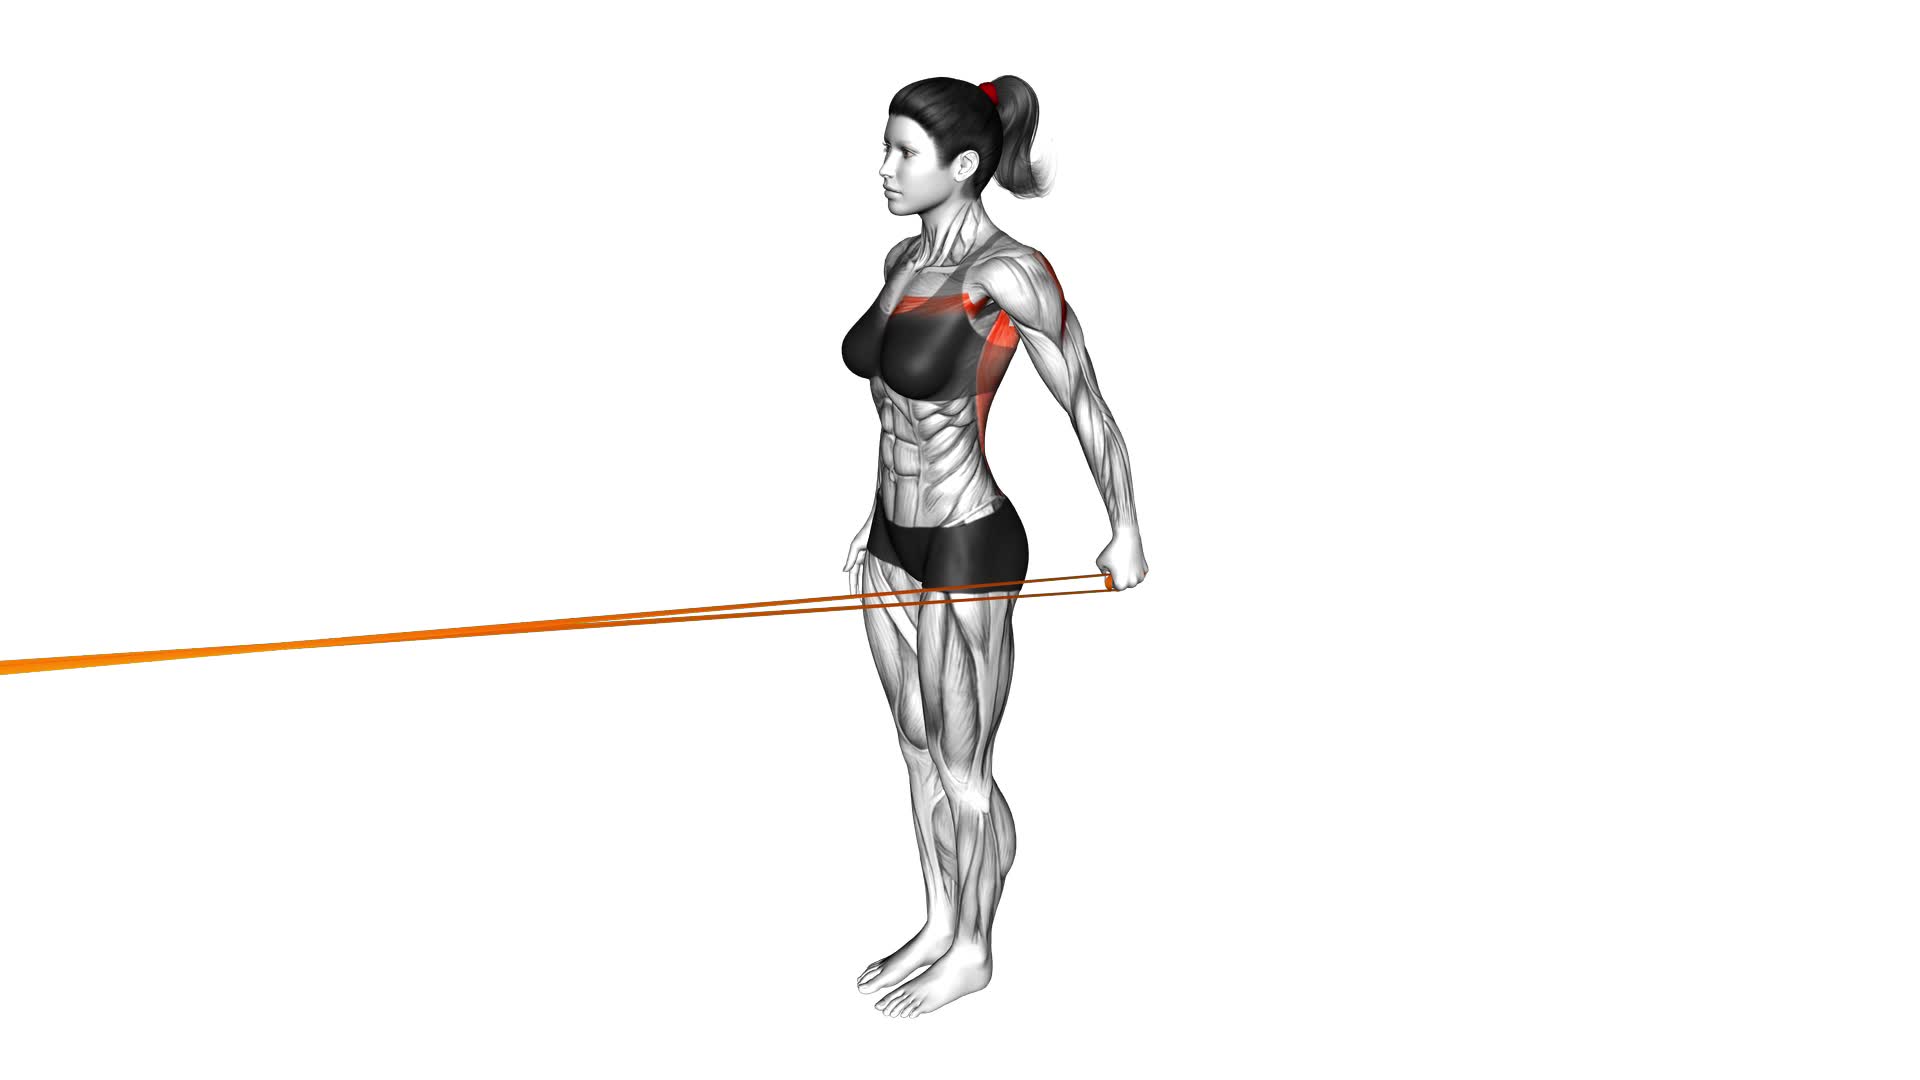 Resistance Band Standing Single Arm Lateral Shoulder Extension (female) - Video Exercise Guide & Tips